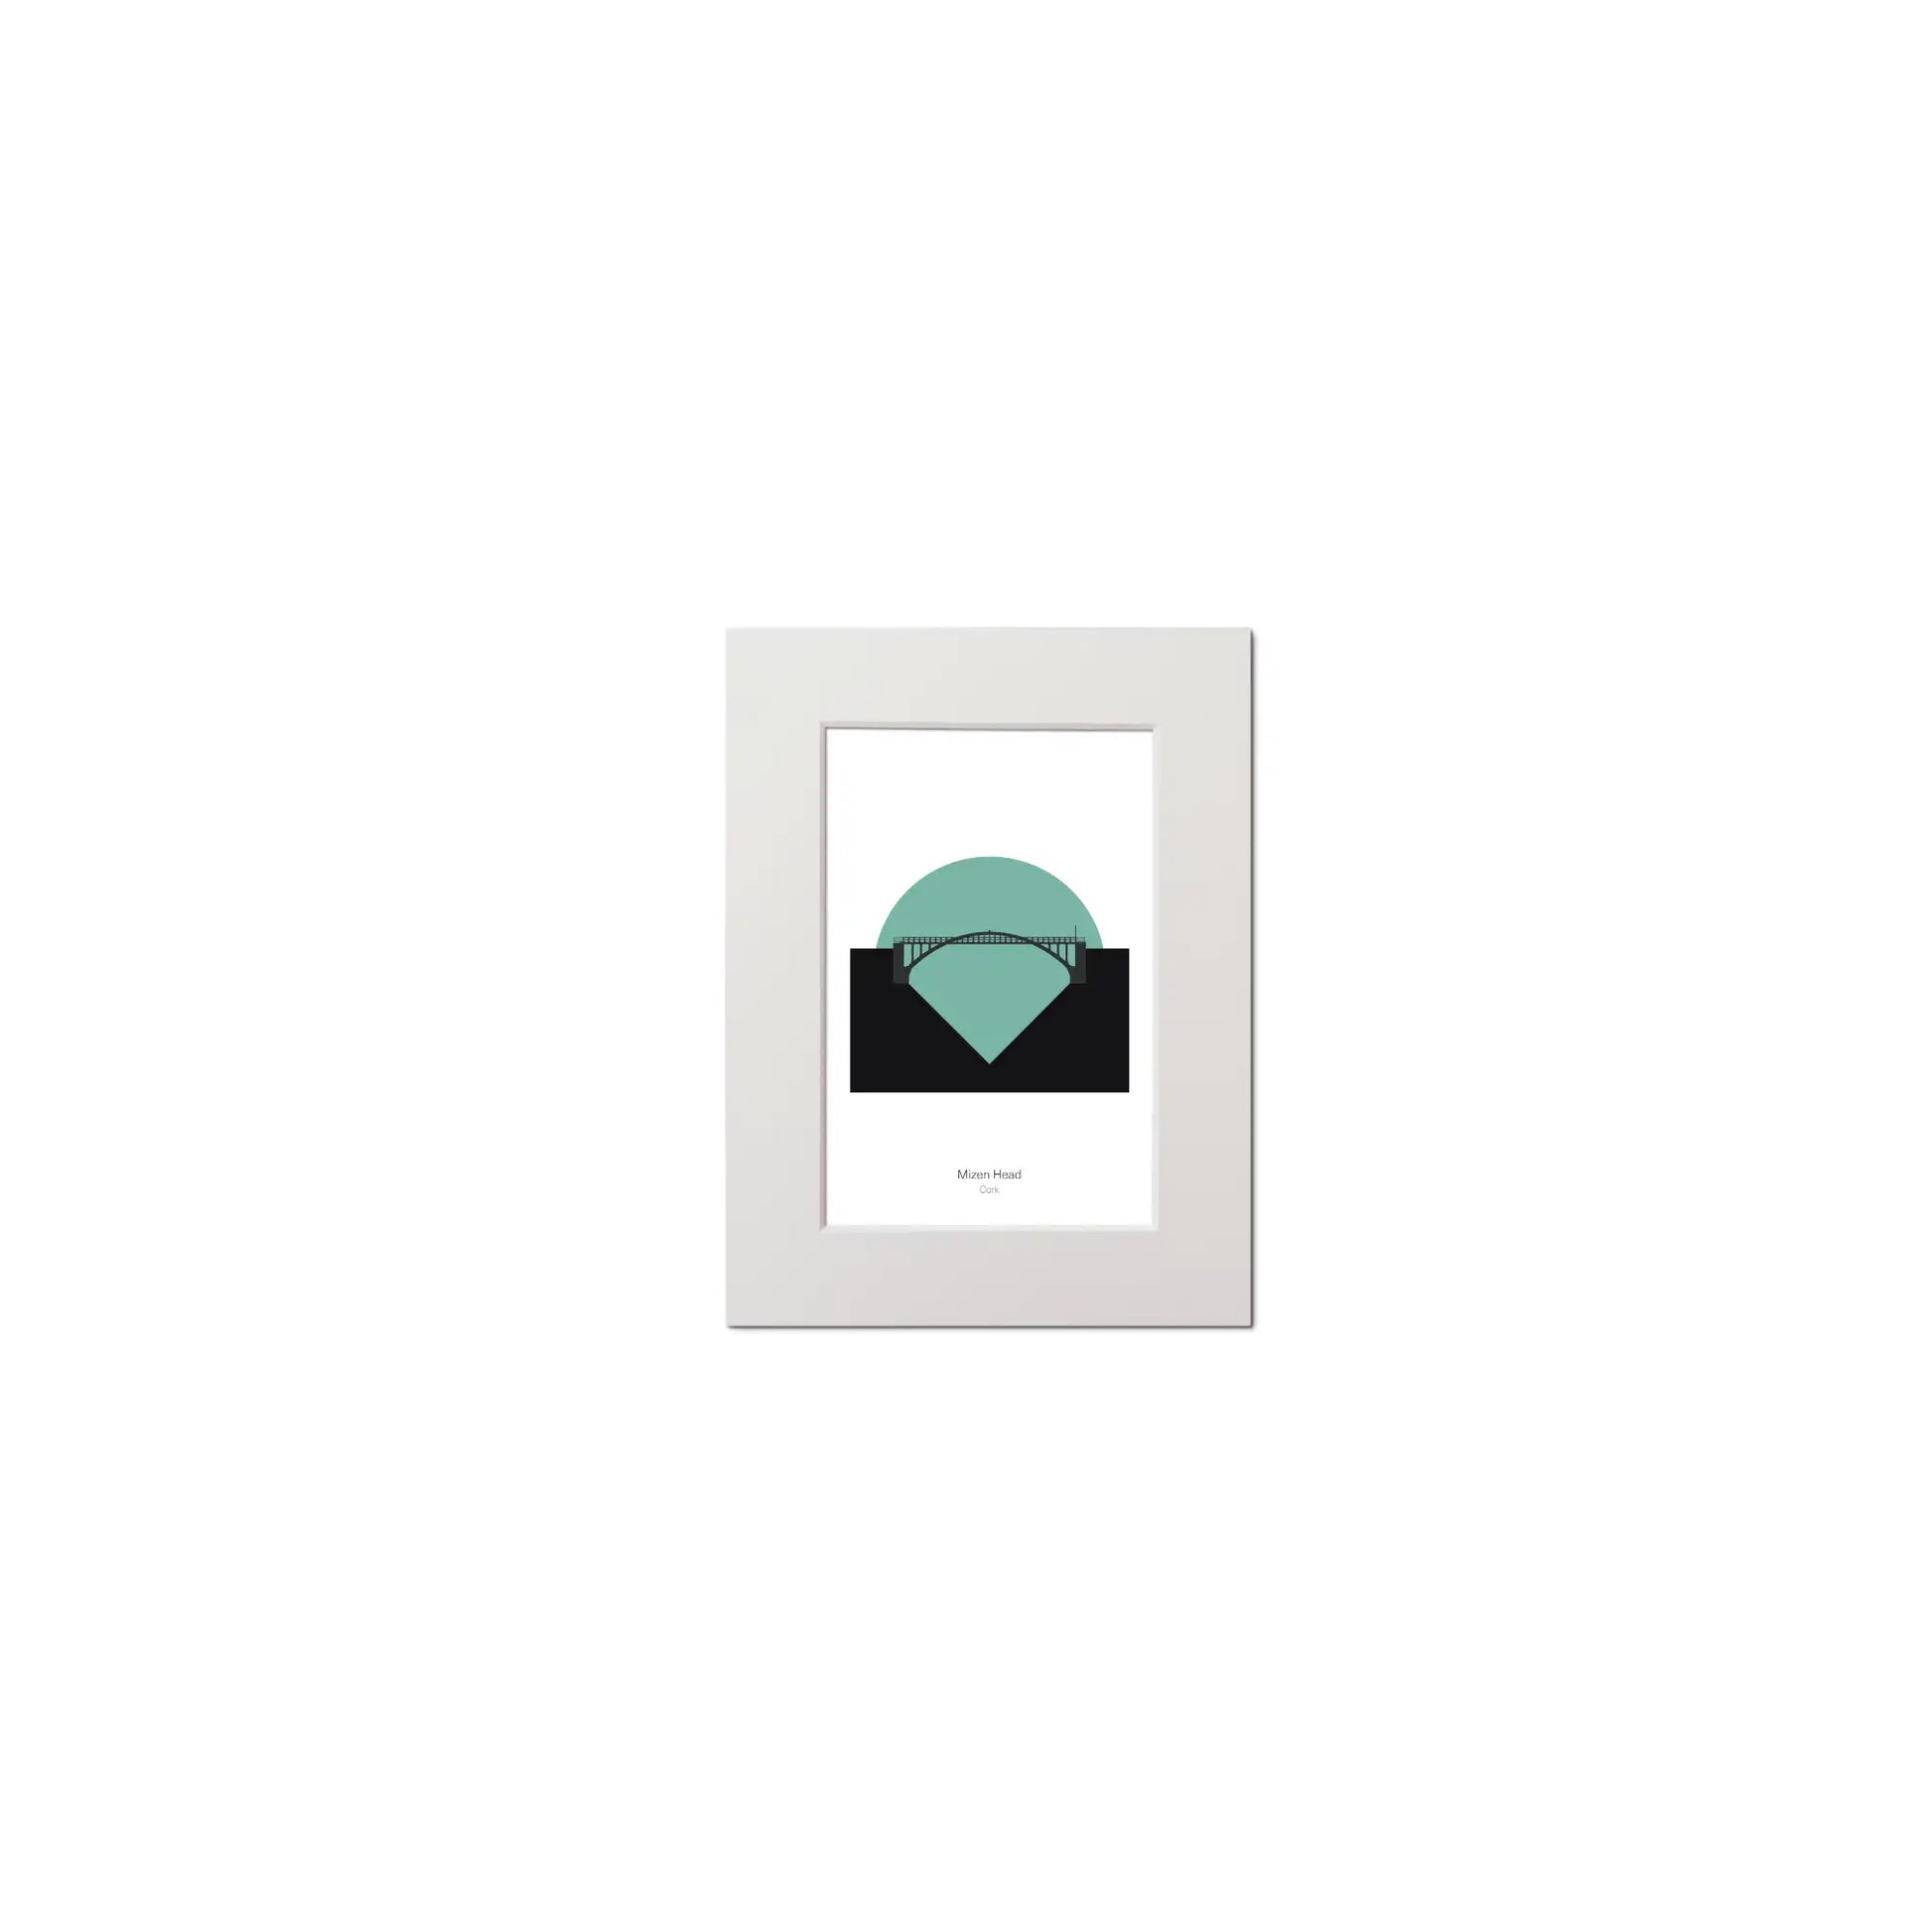 Illustration of Mizen Head lighthouse on a white background inside light blue square, mounted and measuring 15x20cm.